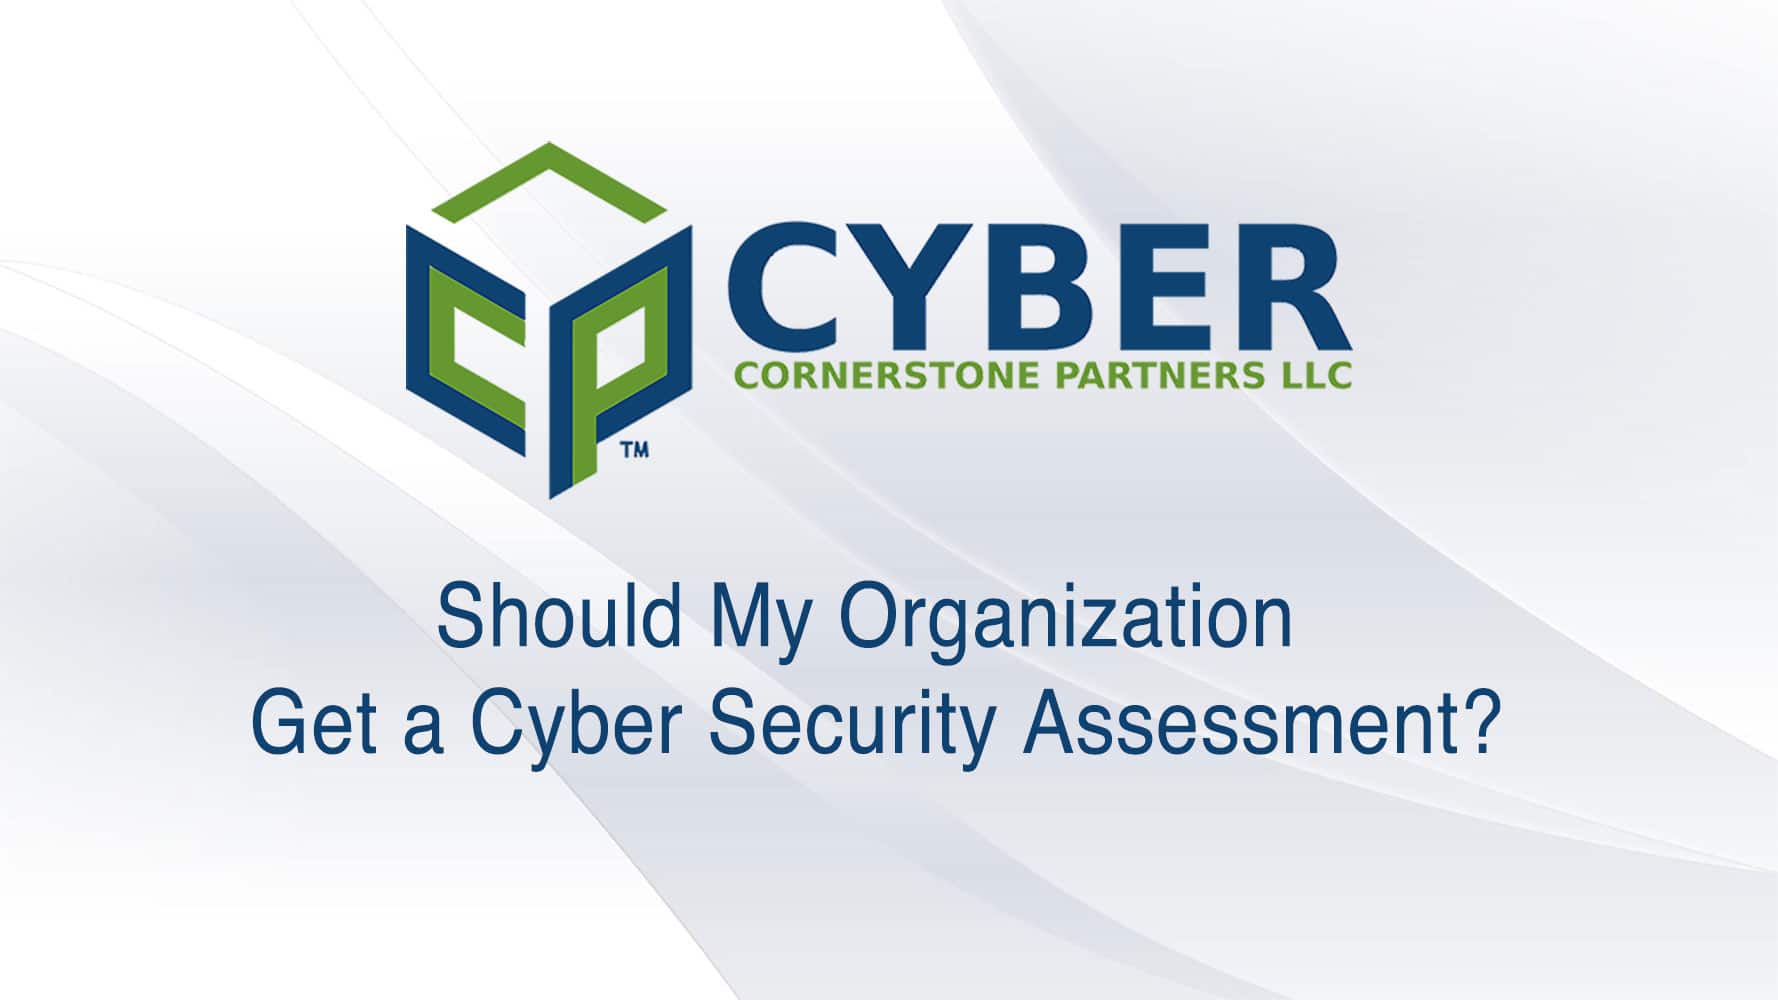 Cyber Security Assessment CP Cyber Security Consulting and Solutions Firm Denver Colorado